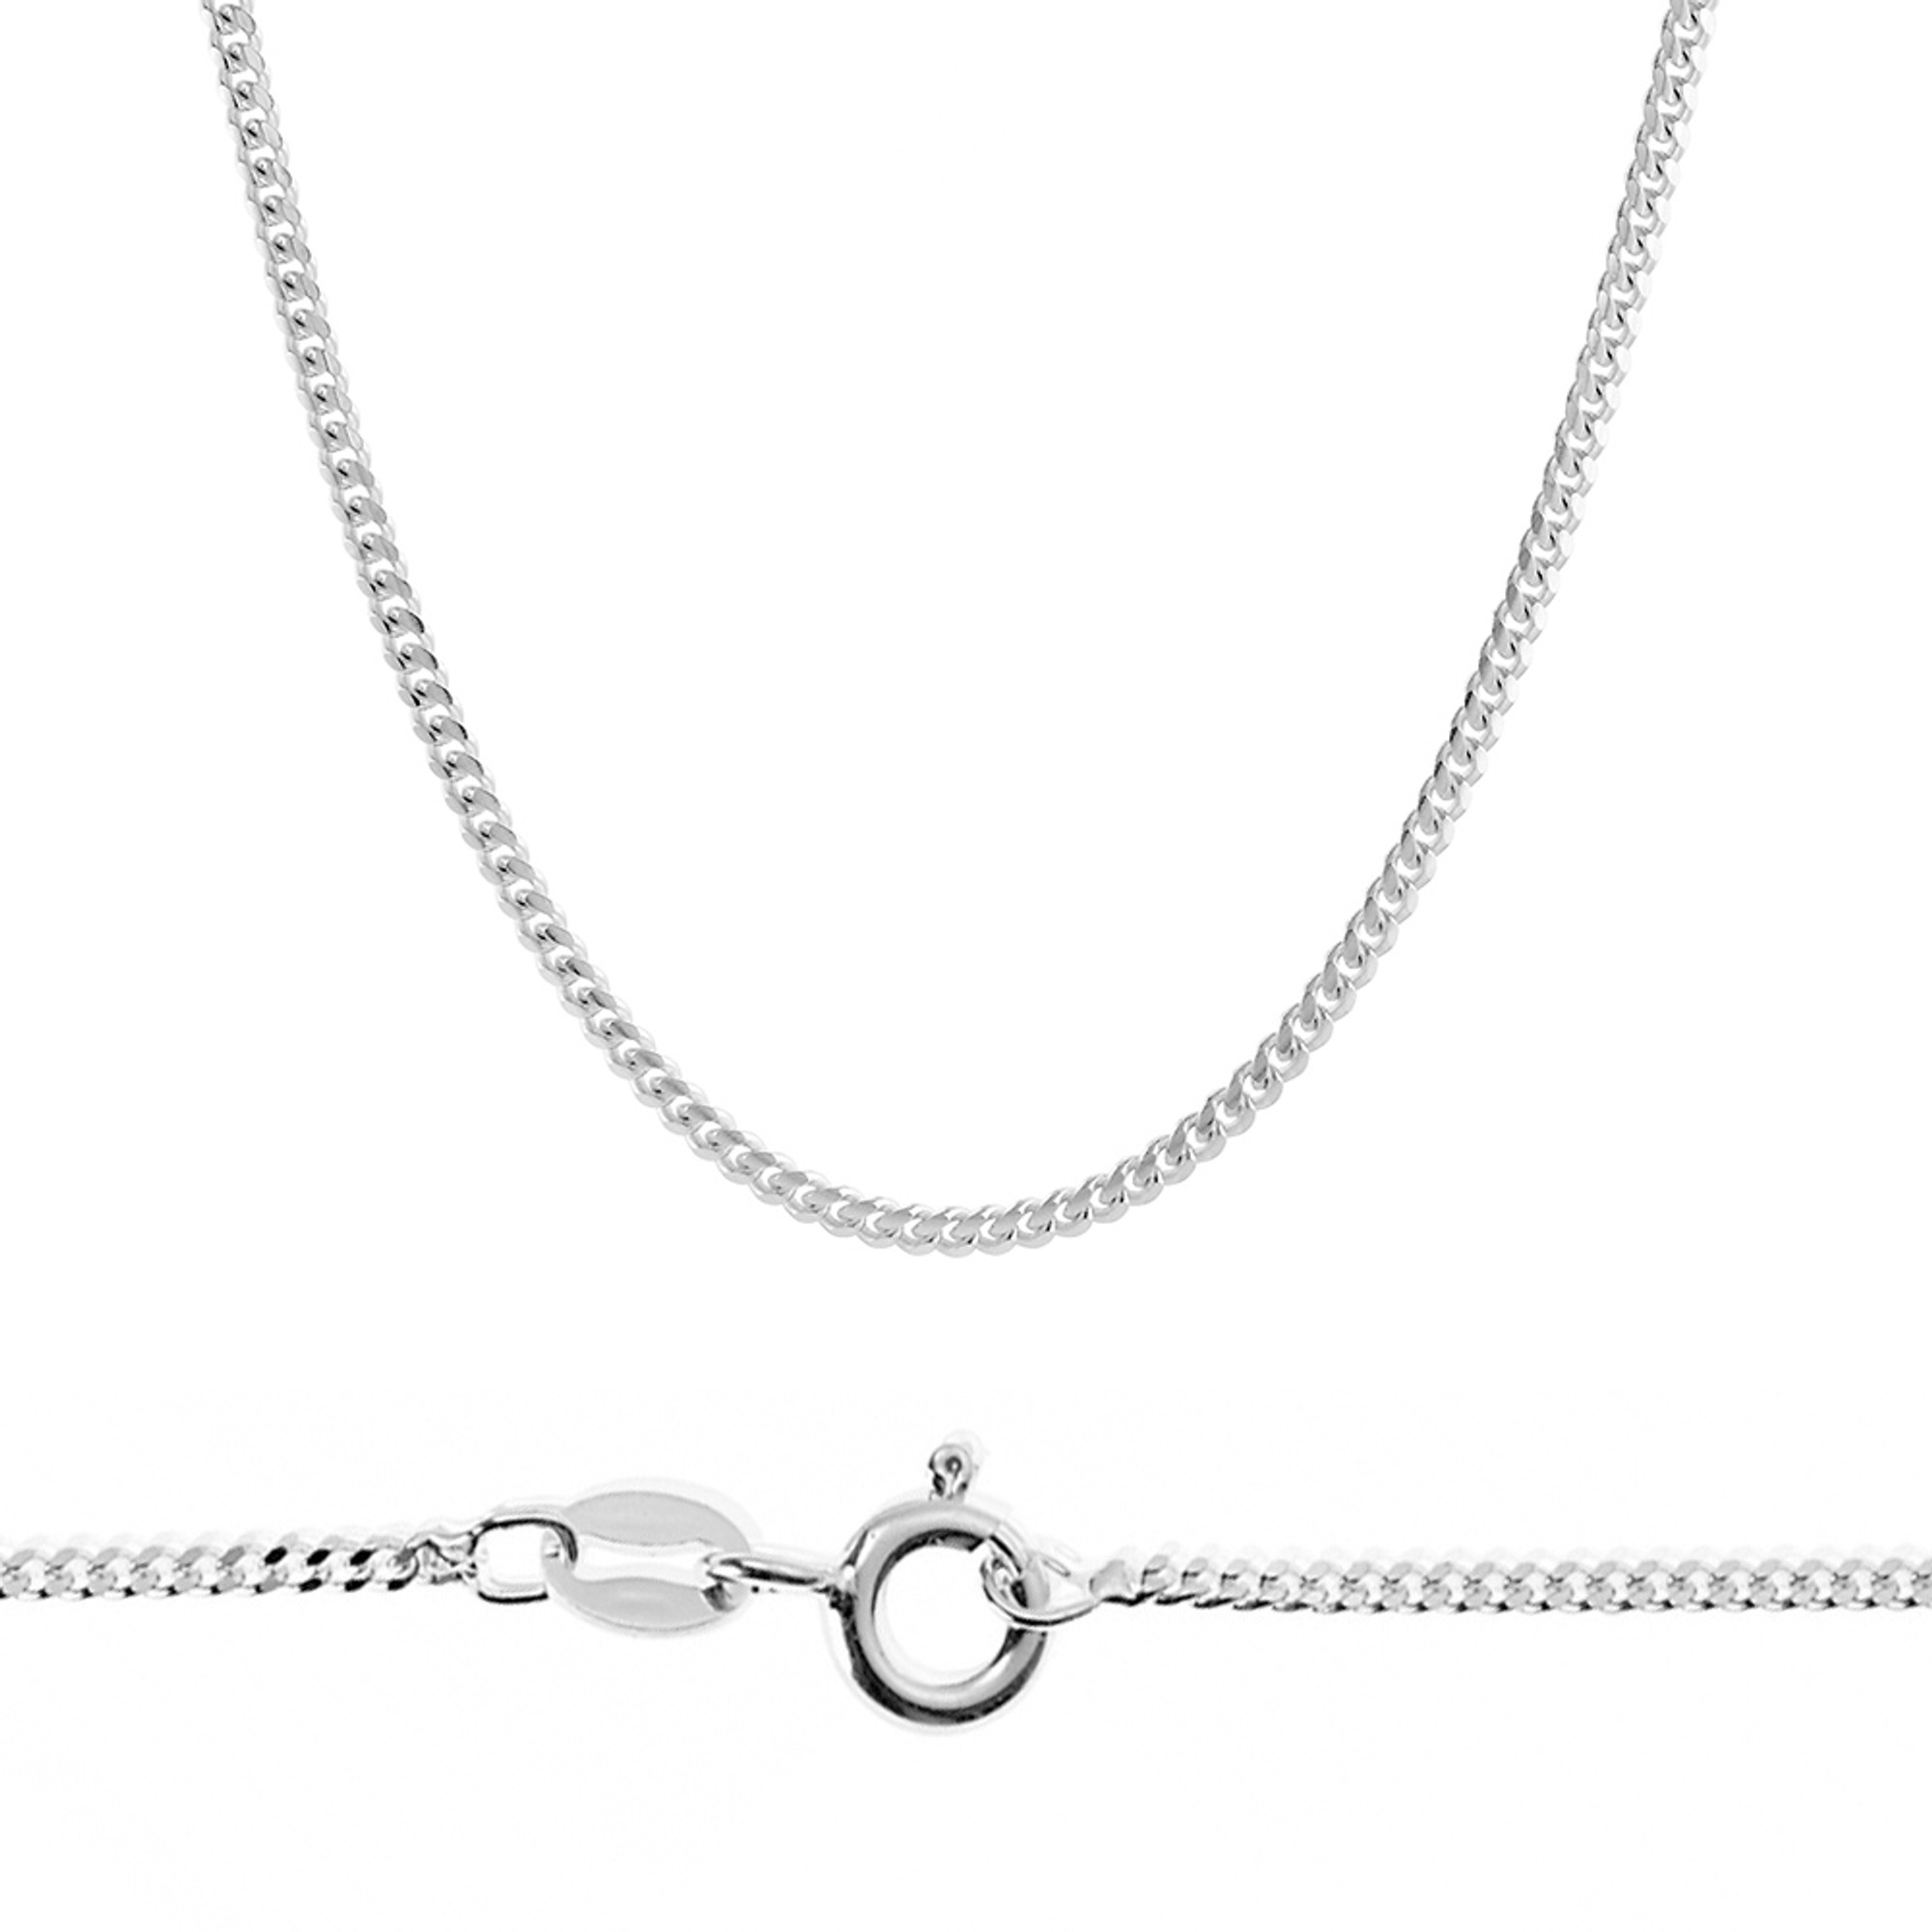 Genuine 999 Fine Silver Necklace For Women Men Wheat Chain 3.5mm Link Gift